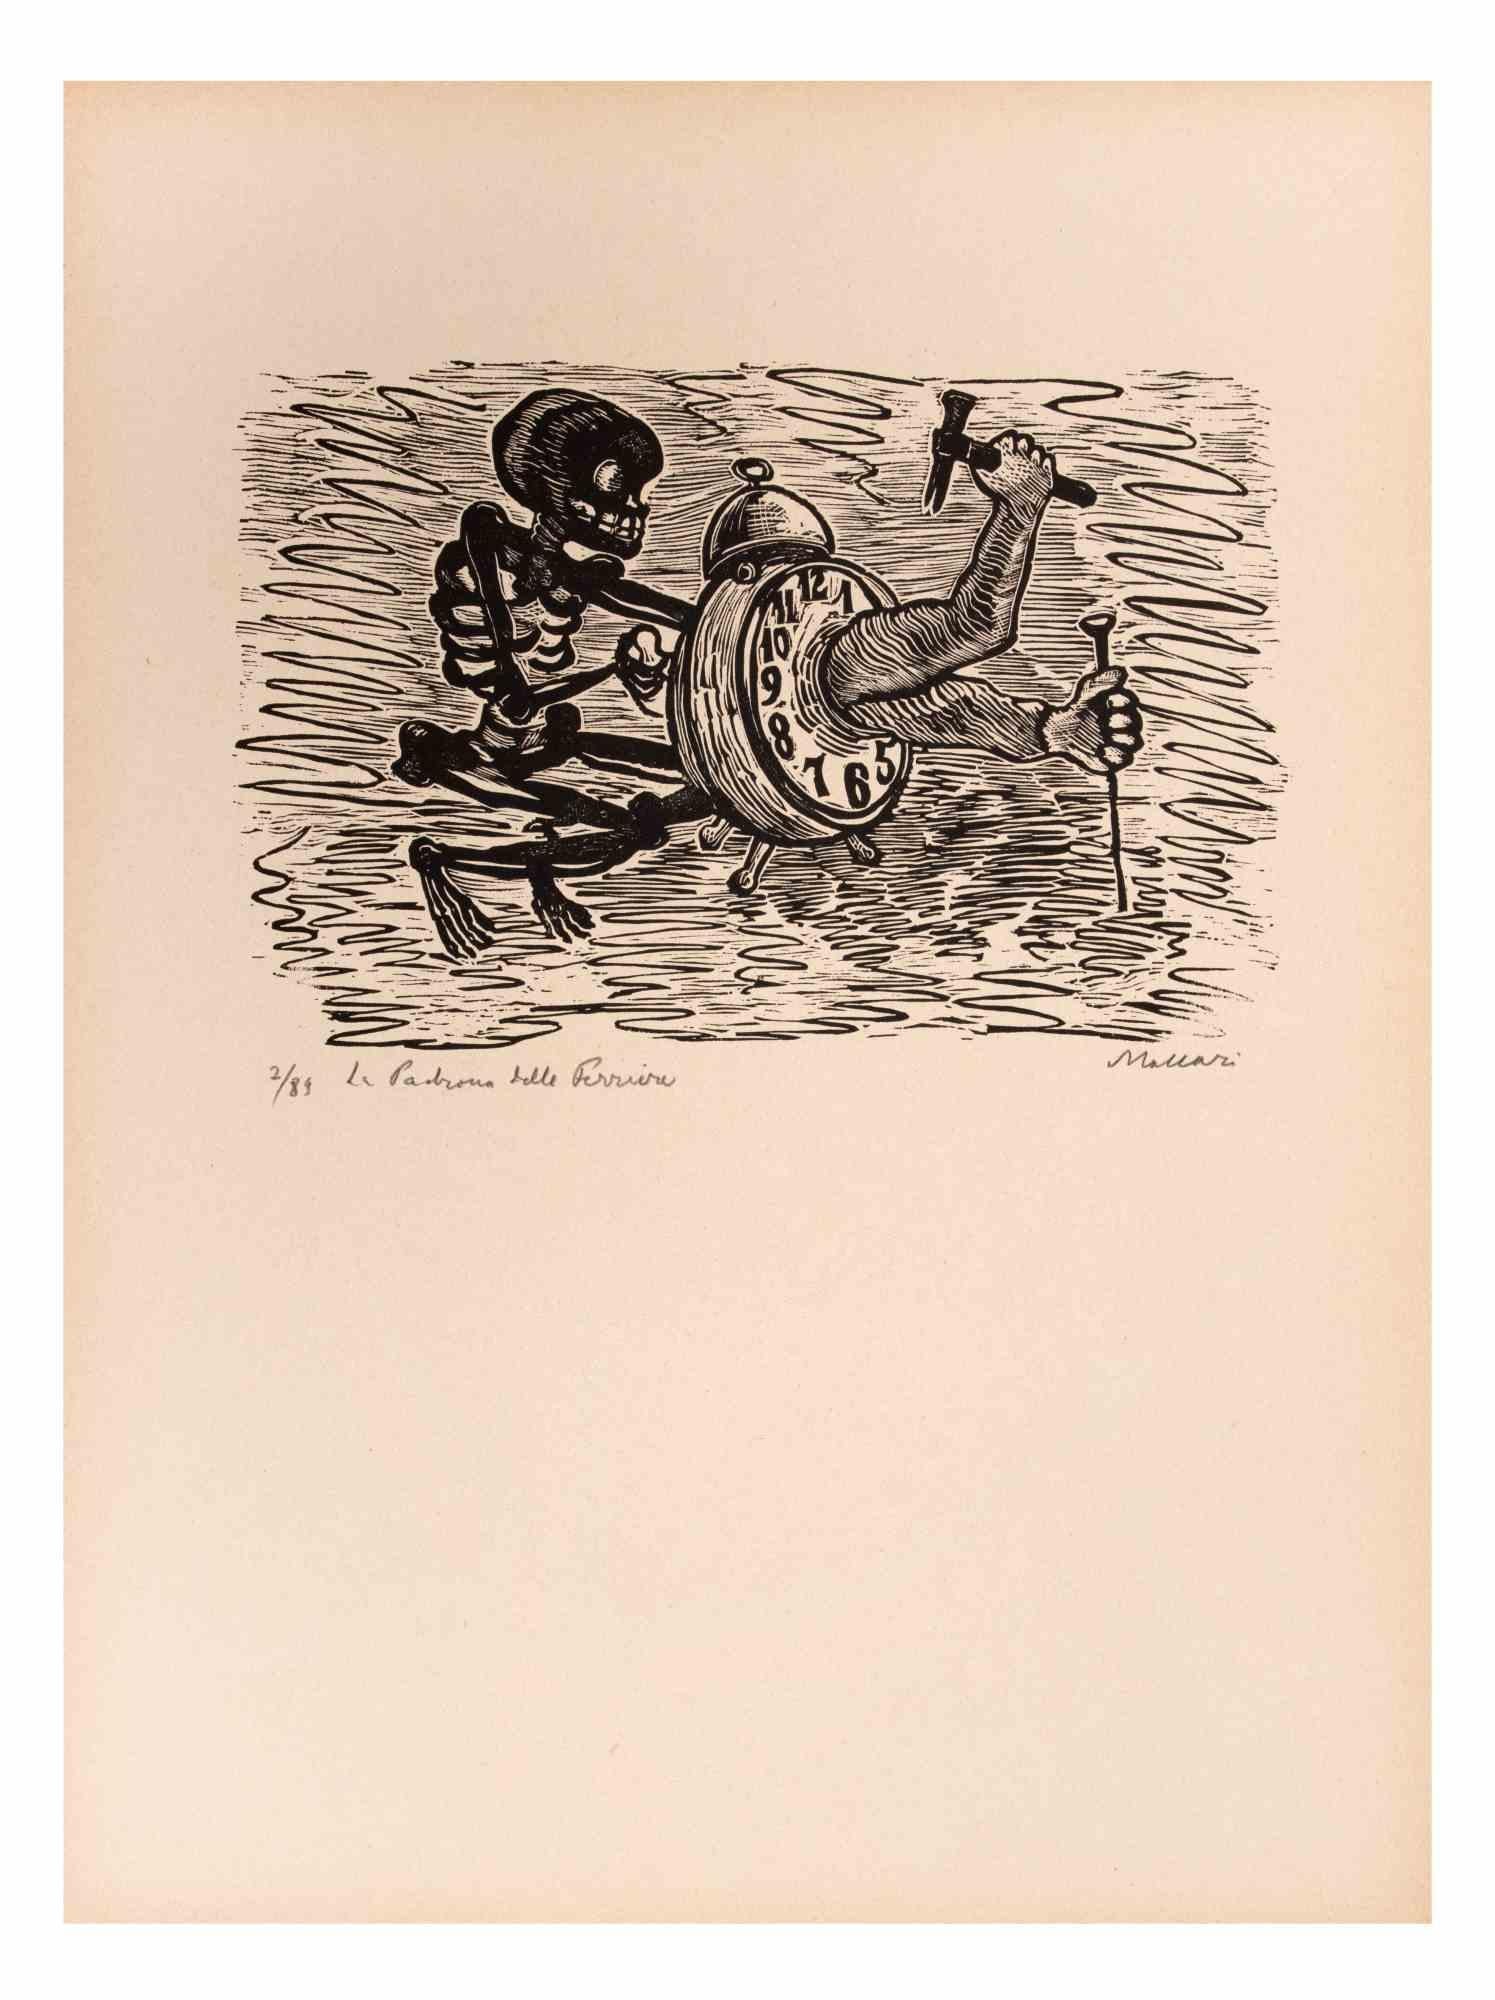 The Mistress is an Artwork realized by Mino Maccari  (1924-1989) in the Mid-20th Century.

B./W. Woodcut on paper. Hand-signed on the lower, numbered 2/89 specimens and titled on the left margin.

Good conditions.

Mino Maccari (Siena, 1924-Rome,